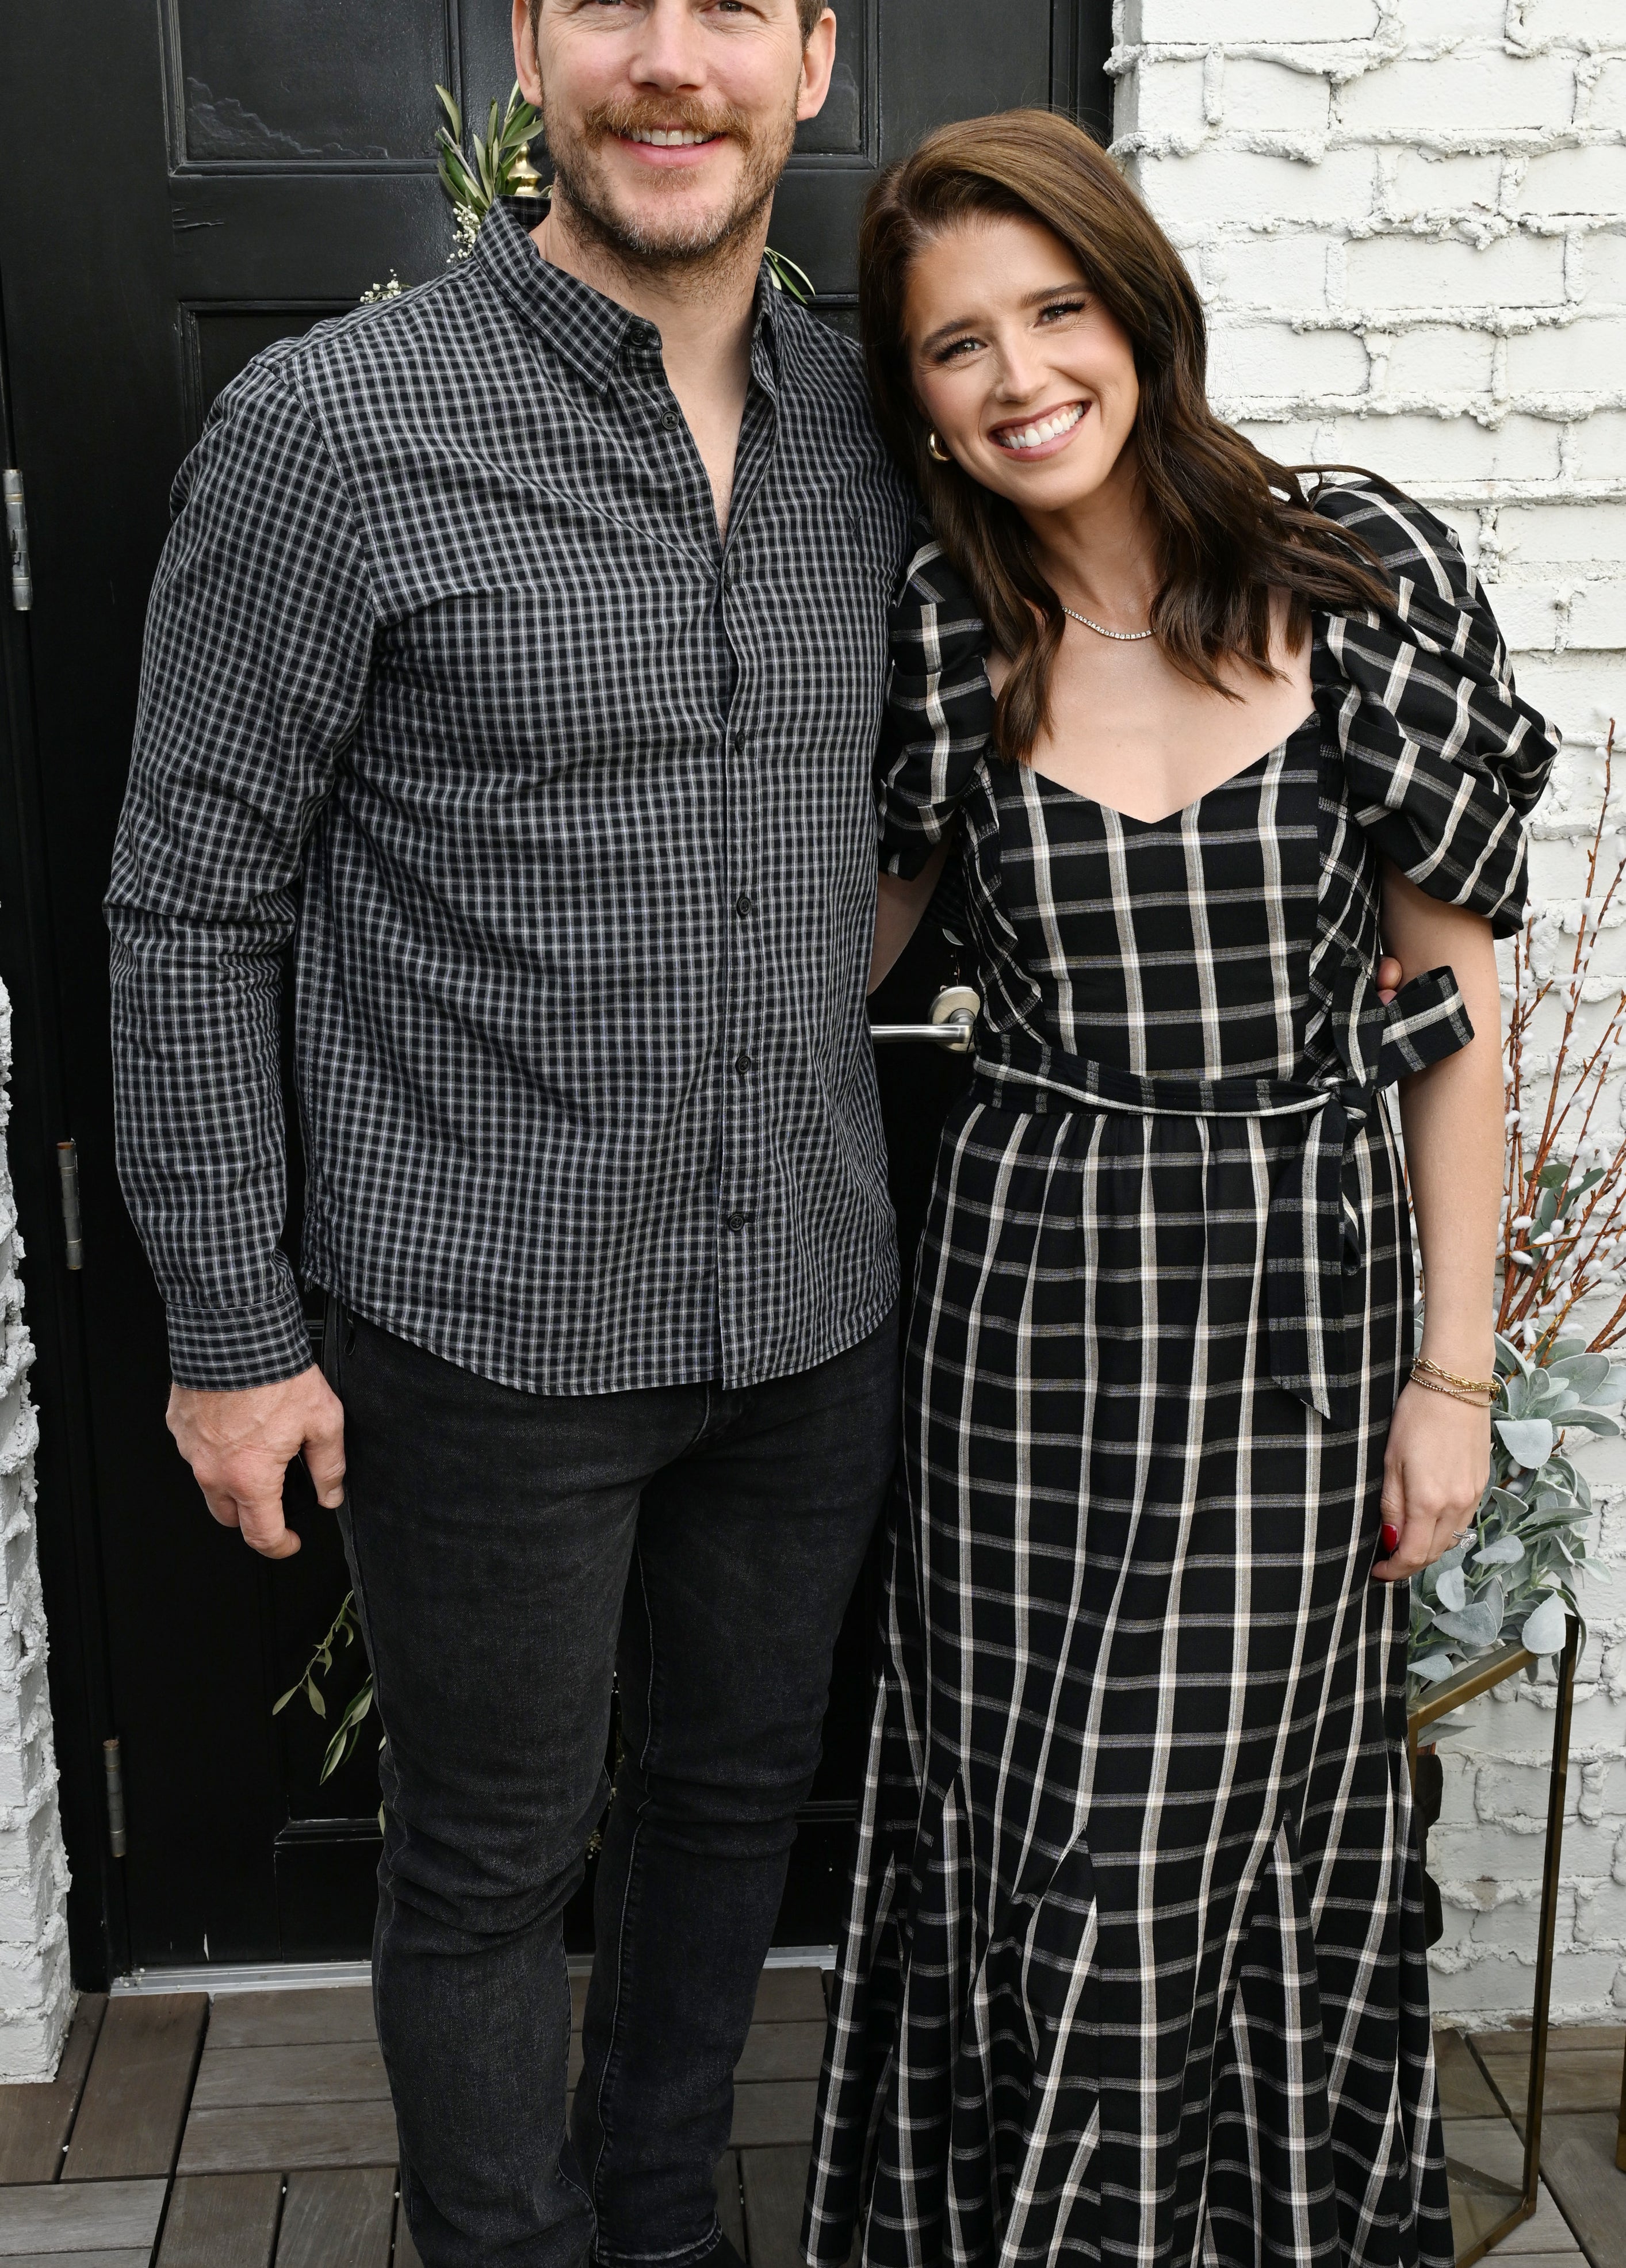 Two individuals standing together, one in a plaid dress with puff sleeves, the other in a checkered shirt and jeans